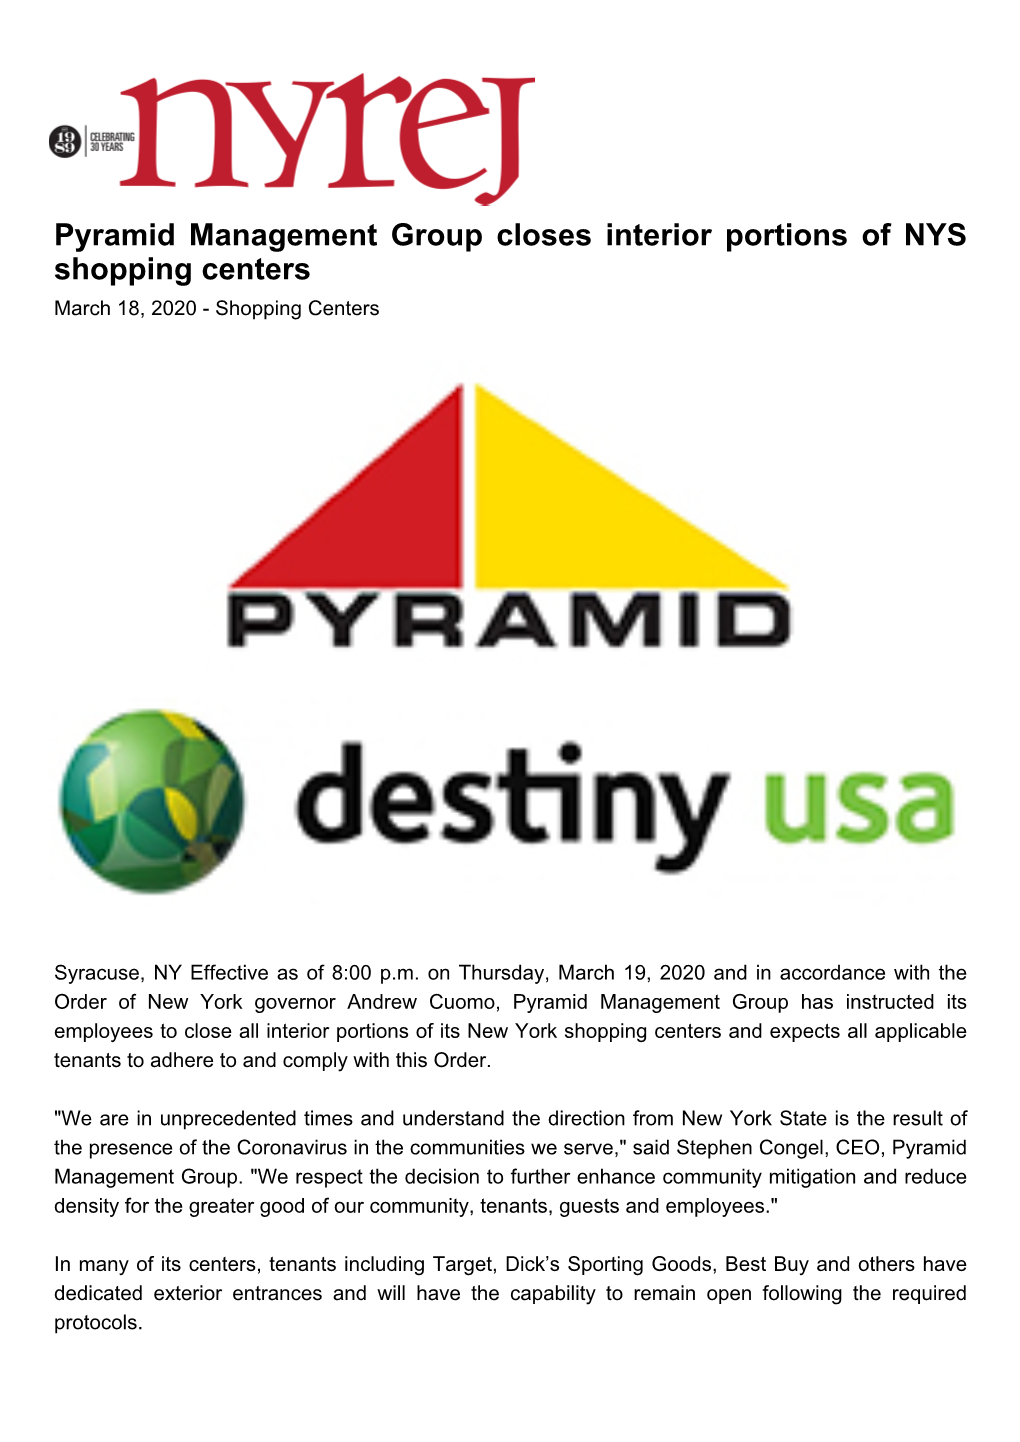 Pyramid Management Group Closes Interior Portions of NYS Shopping Centers March 18, 2020 - Shopping Centers